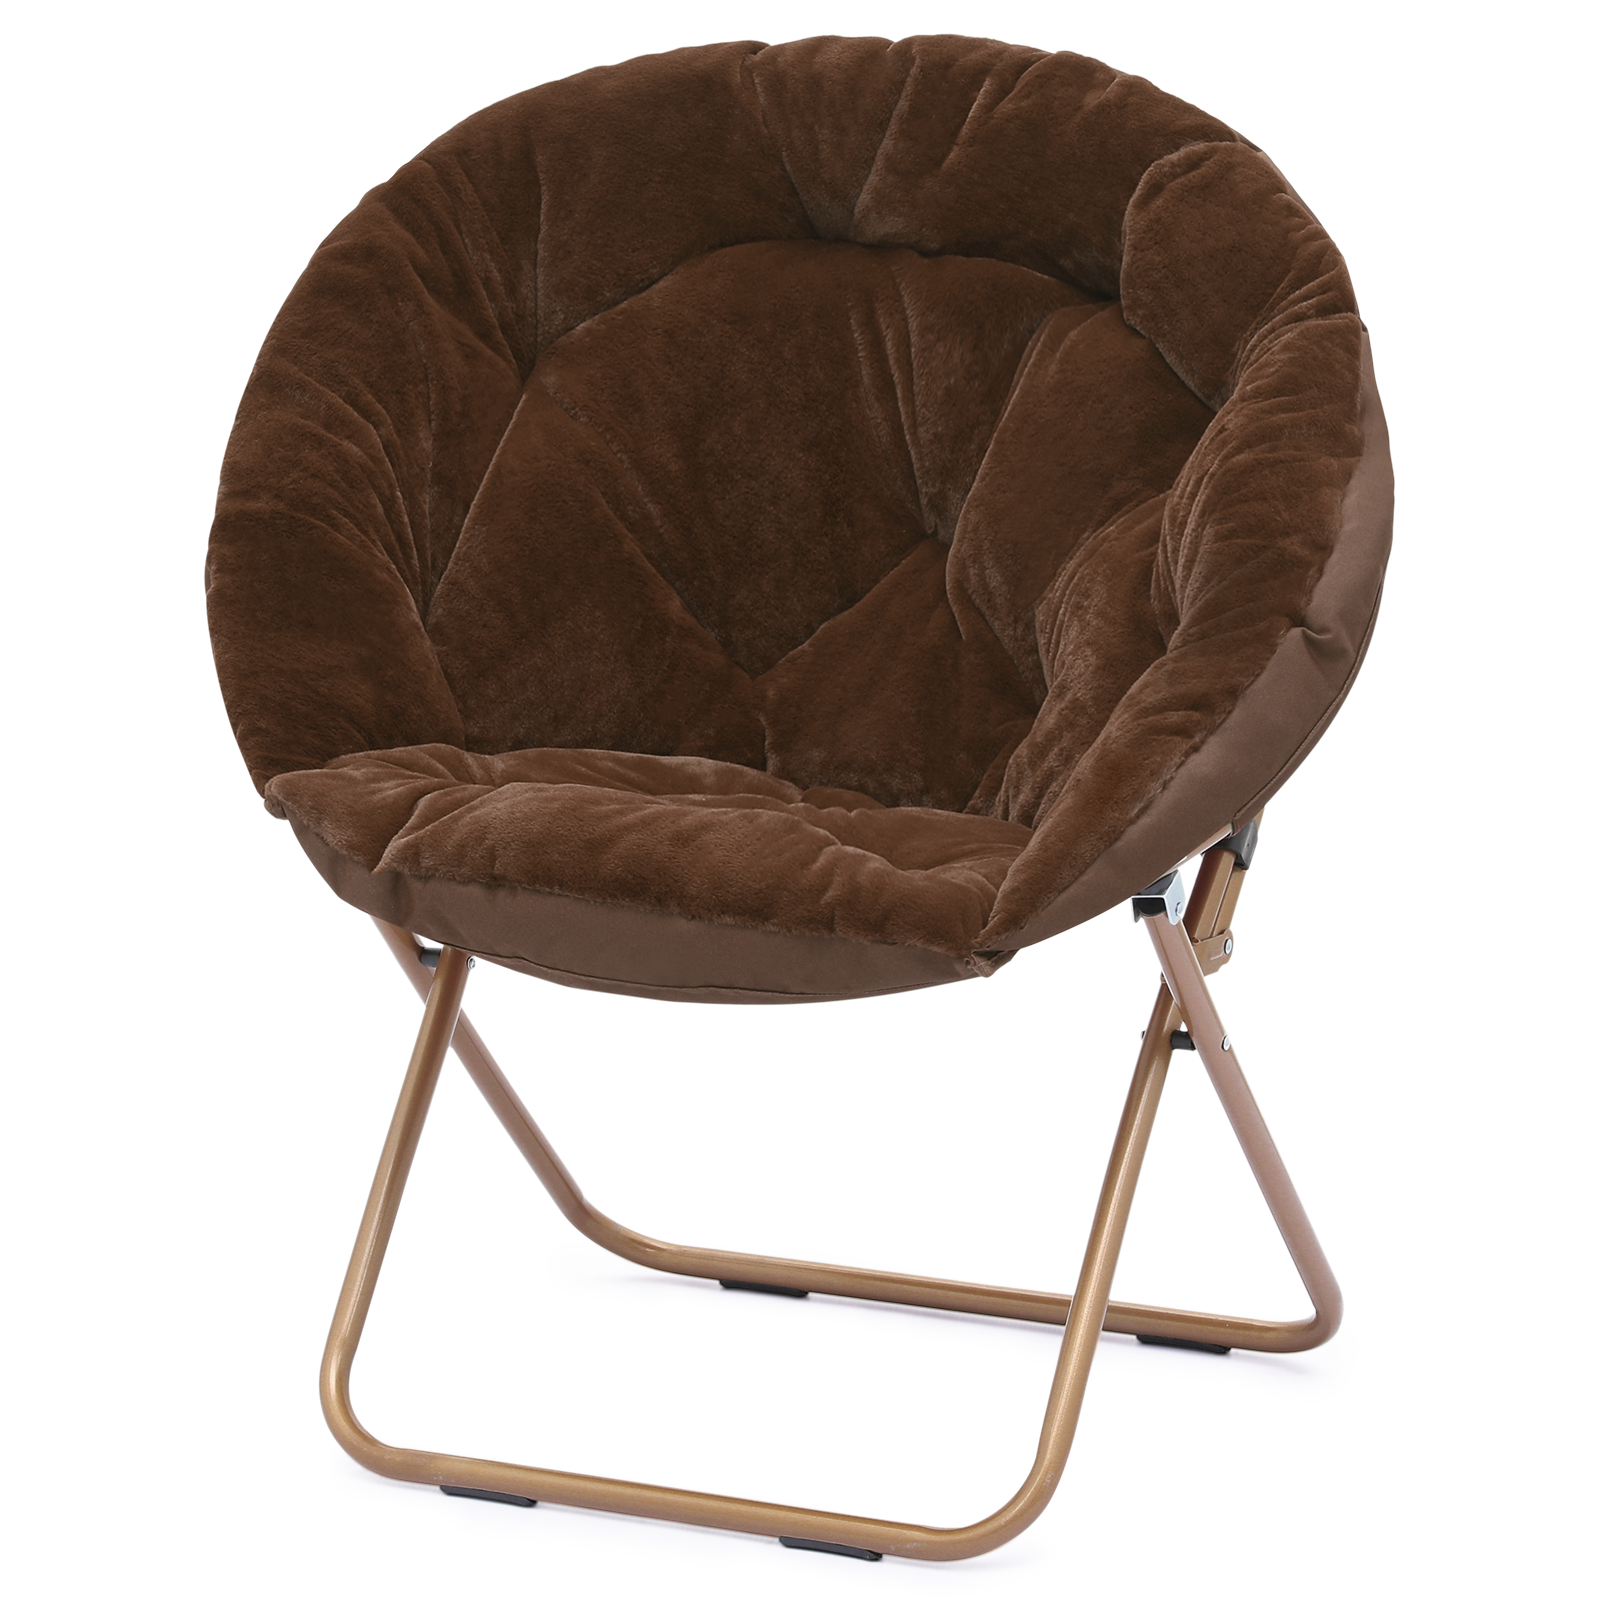 Magshion Folding Lounge Chair Comfy Faux Fur Saucer Chair, Cozy Moon Chair Seating with Metal Frame for Home Living Room Bedroom, Brown - image 1 of 10